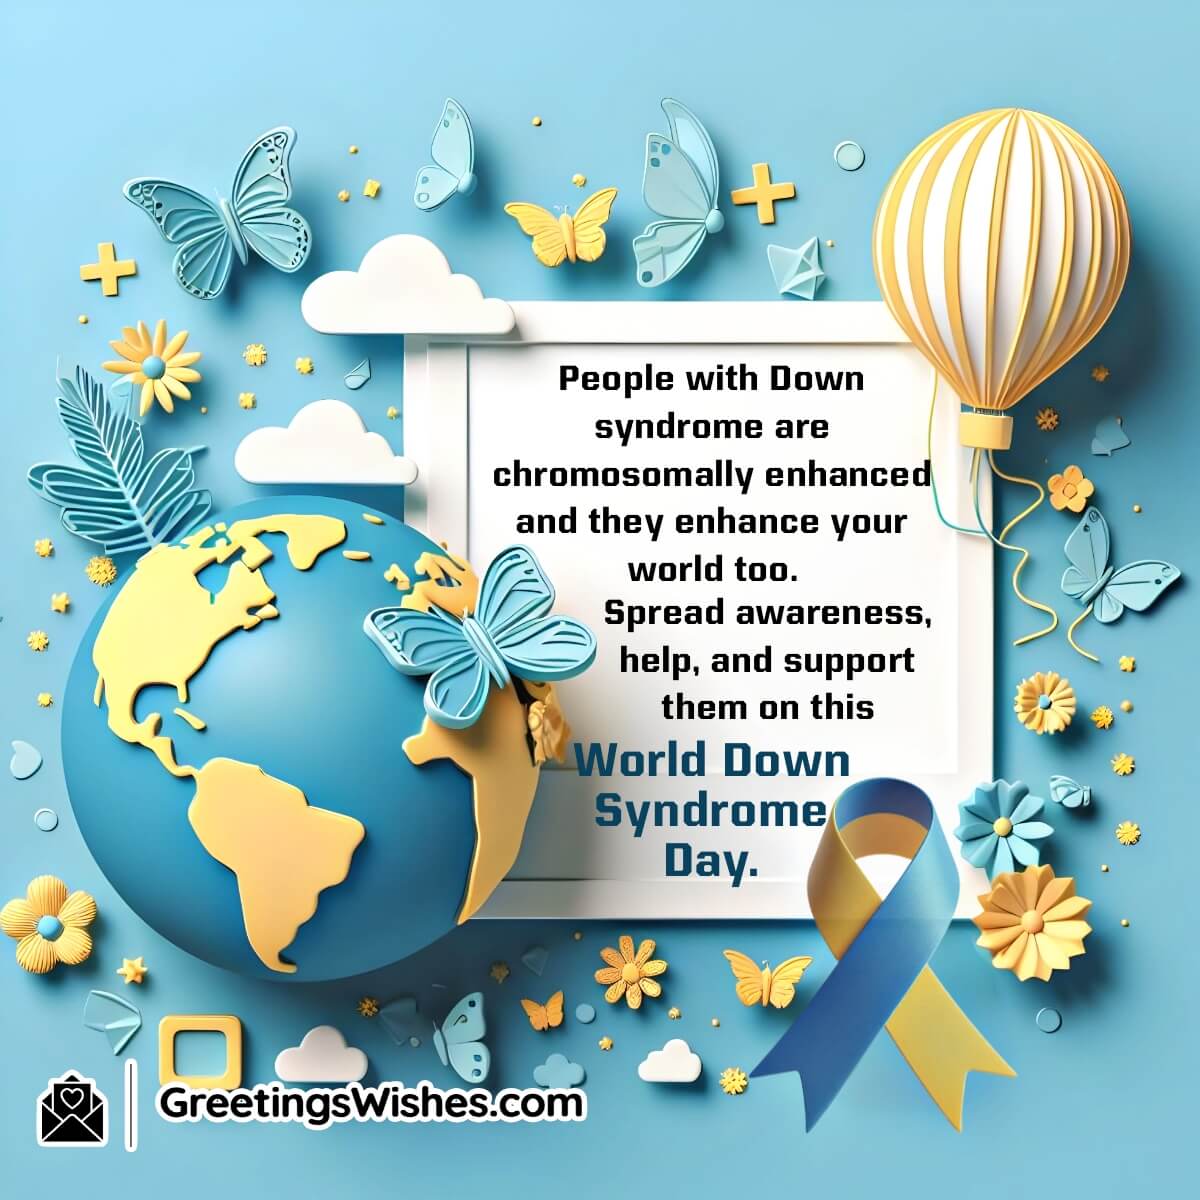 World Down Syndrome Day. Awareness Message